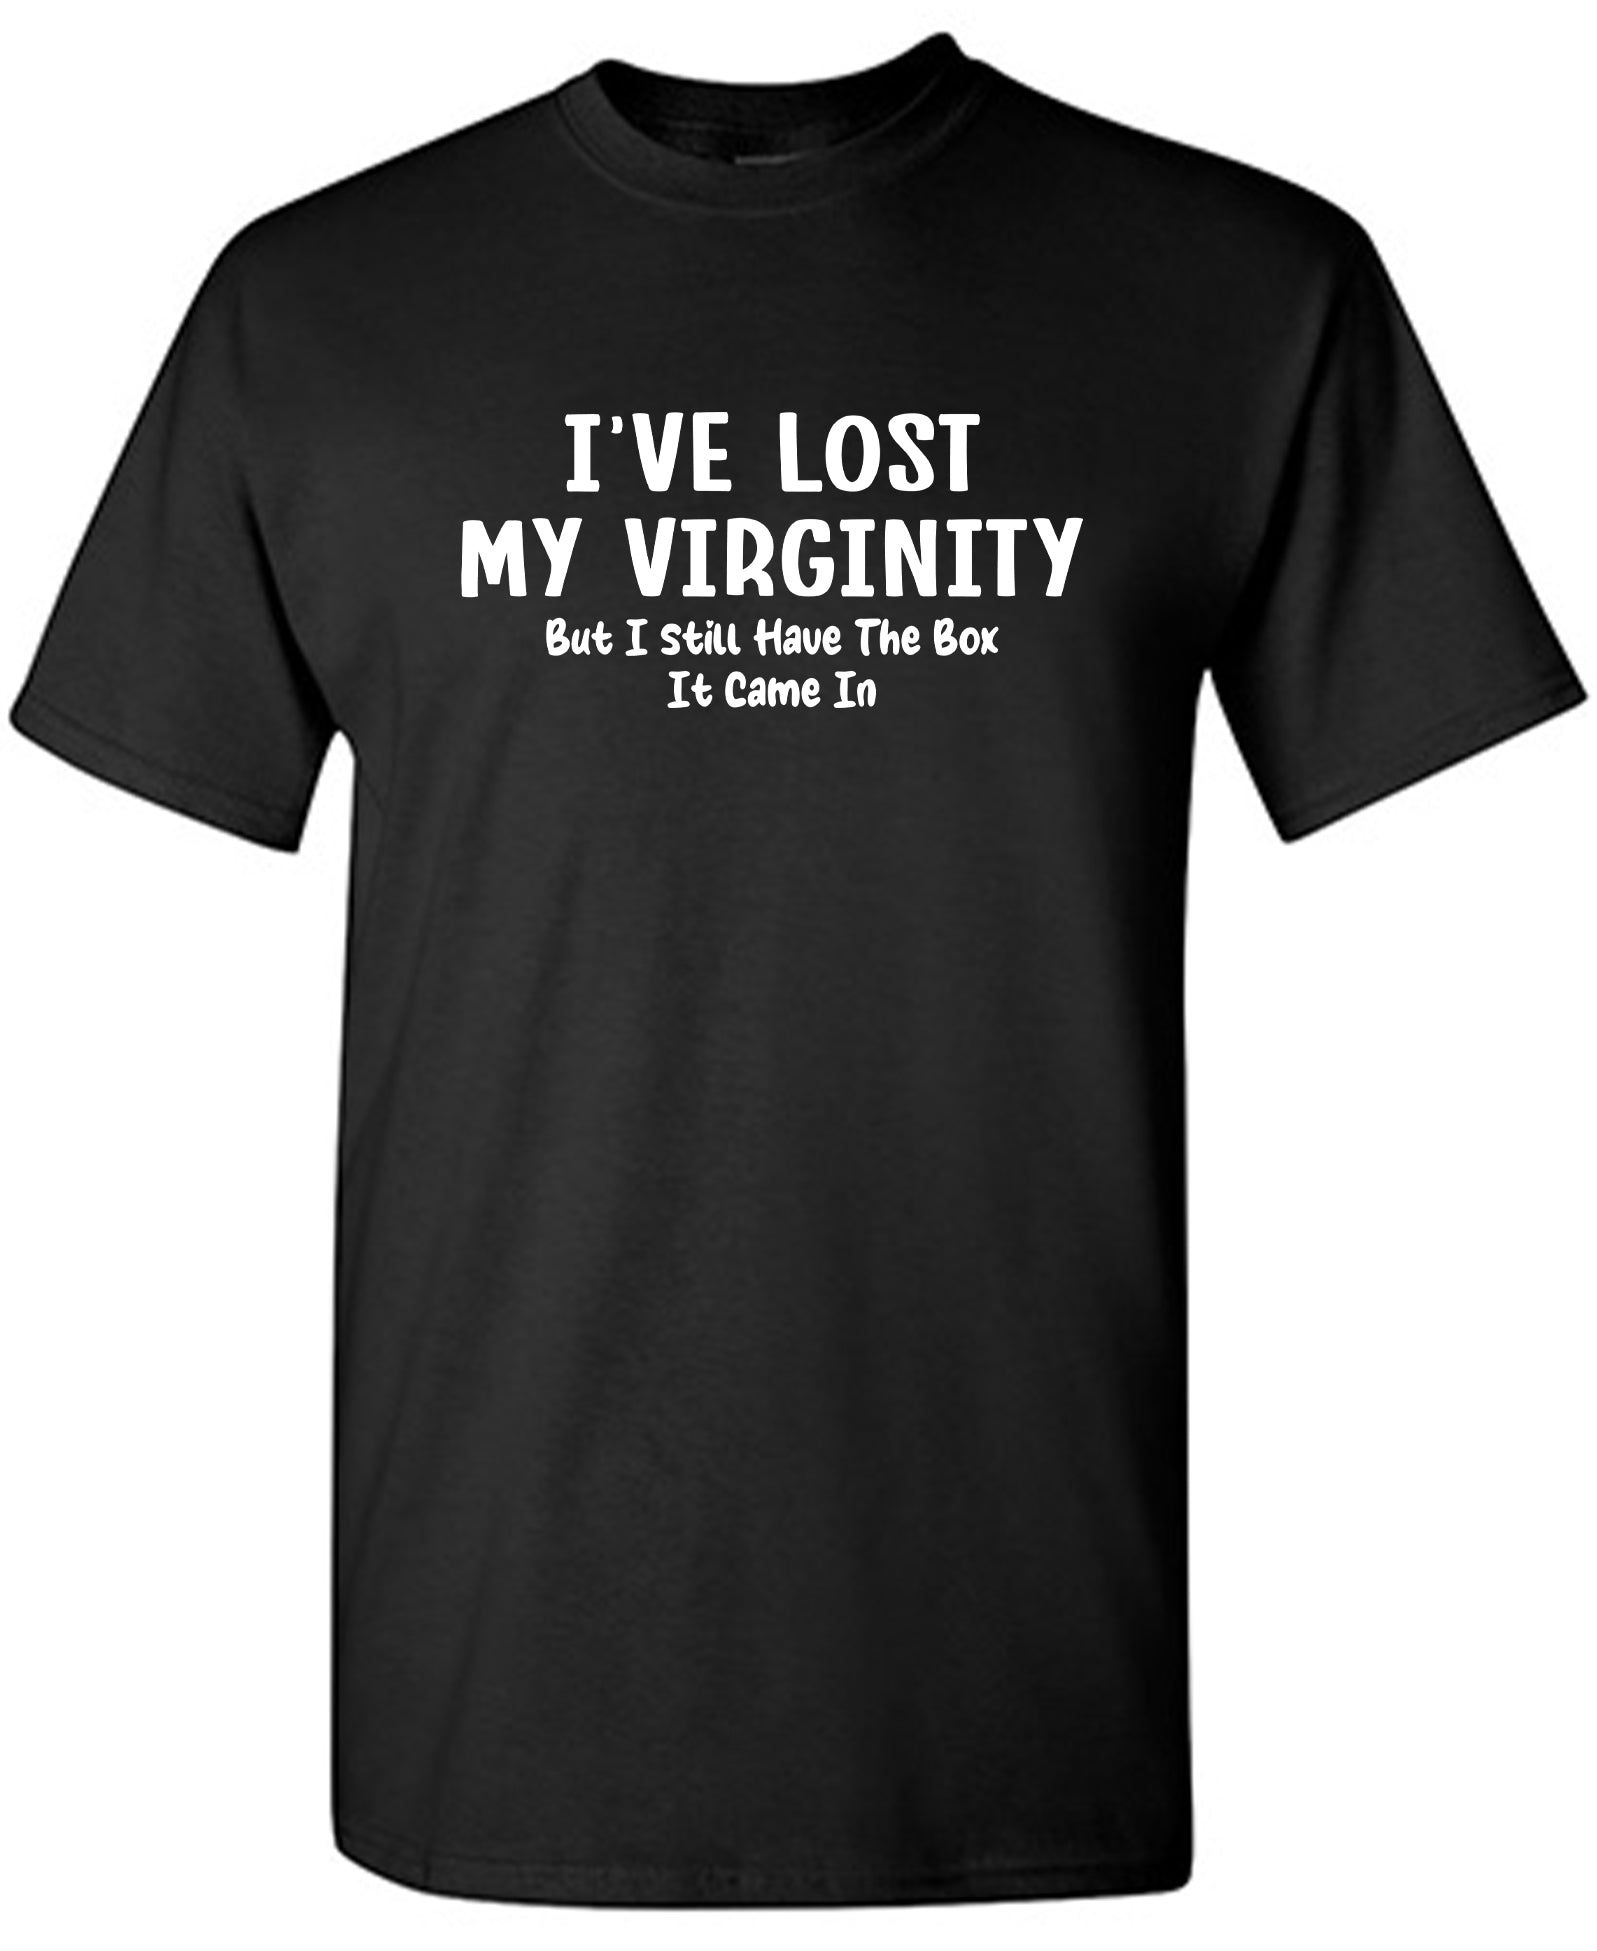 I've Lost My Virginity But I Still have the Box it came in - Funny T Shirts & Graphic Tees